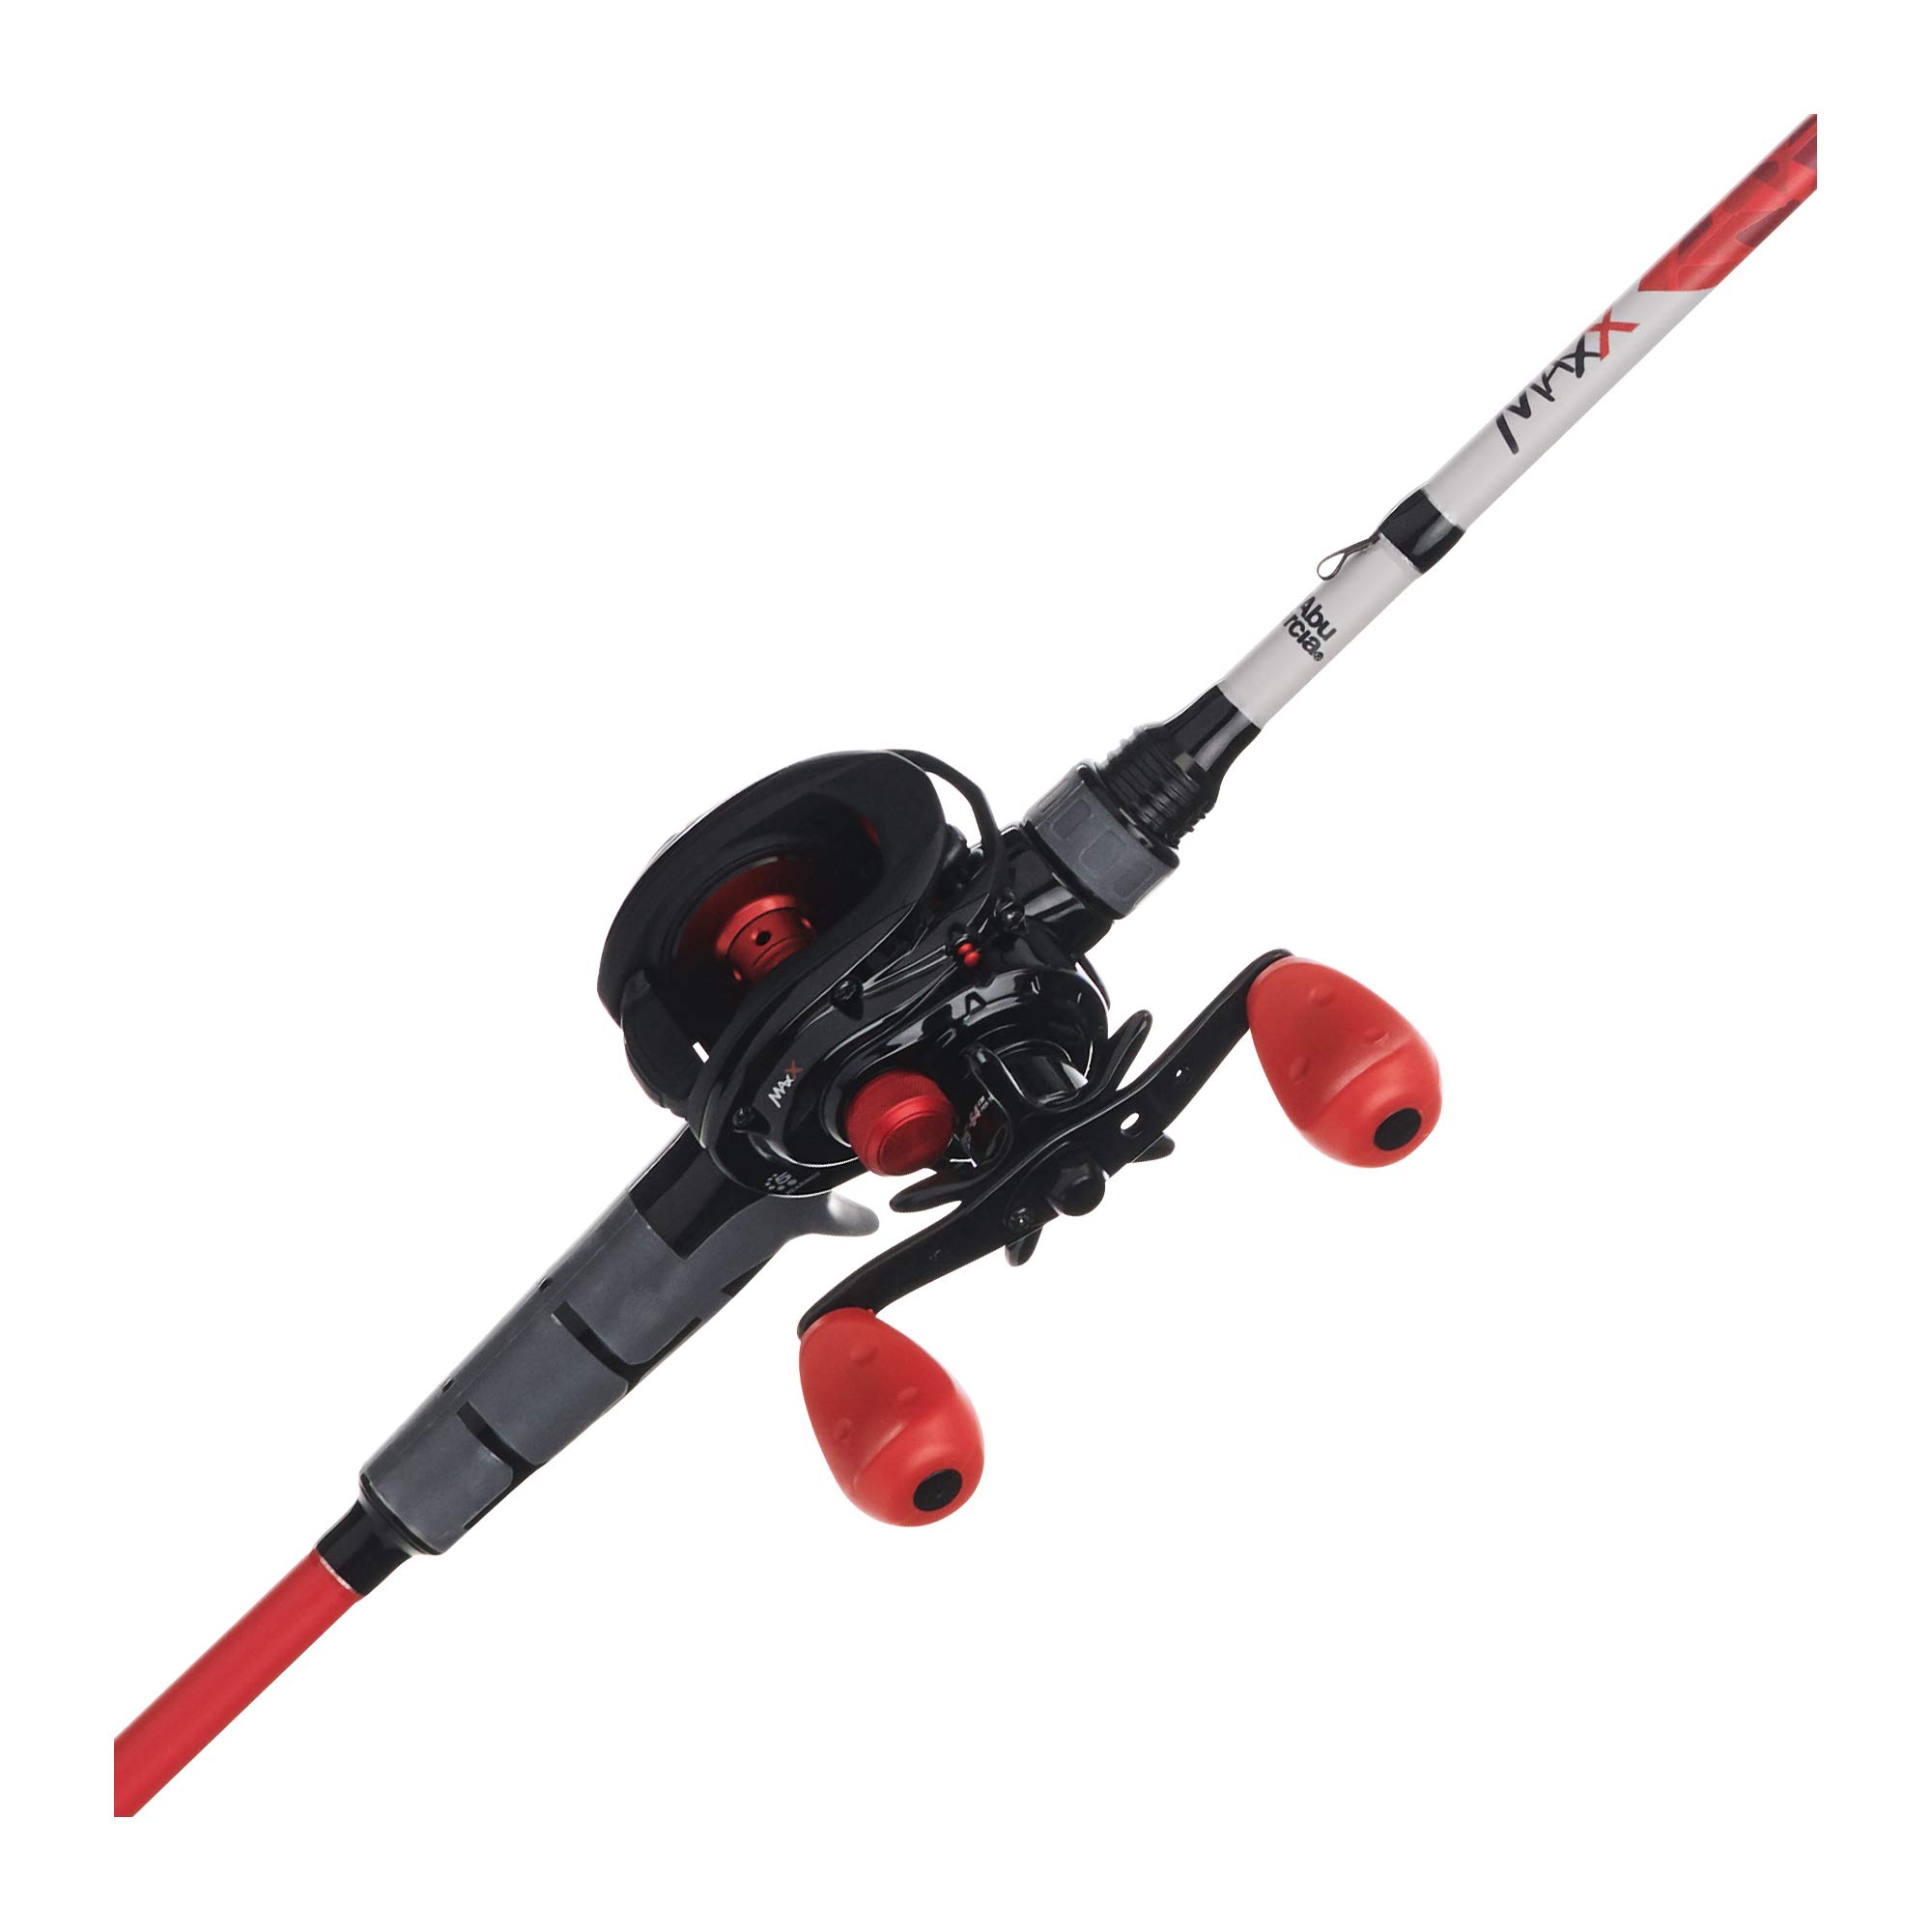 Abu Garcia 6’6” Max X Fishing Rod and Reel Baitcast Combo, 4+1 Ball Bearings with Lightweight Graphite Frame $49.98 + Free Shipping